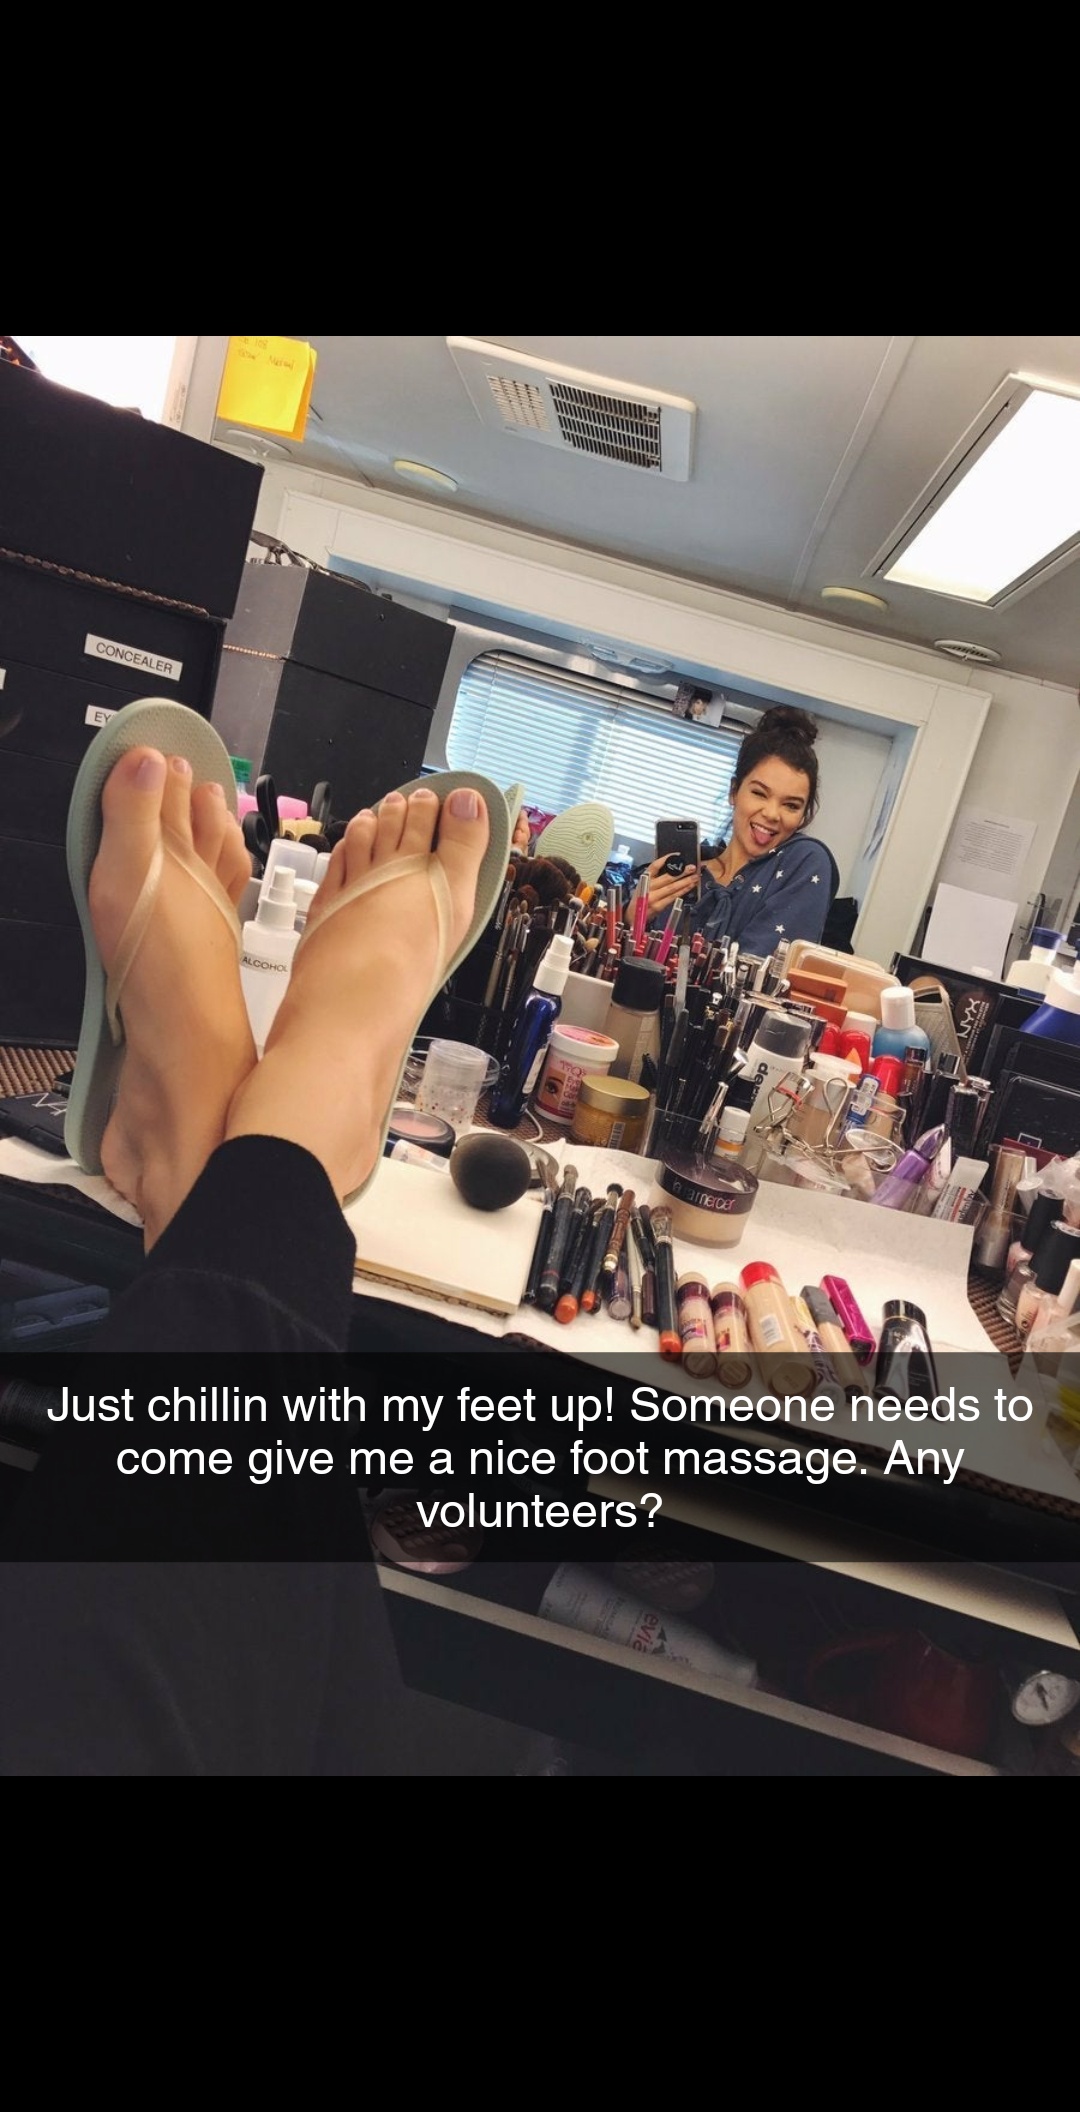 Who Is Going To Rub Her Feet Scrolller